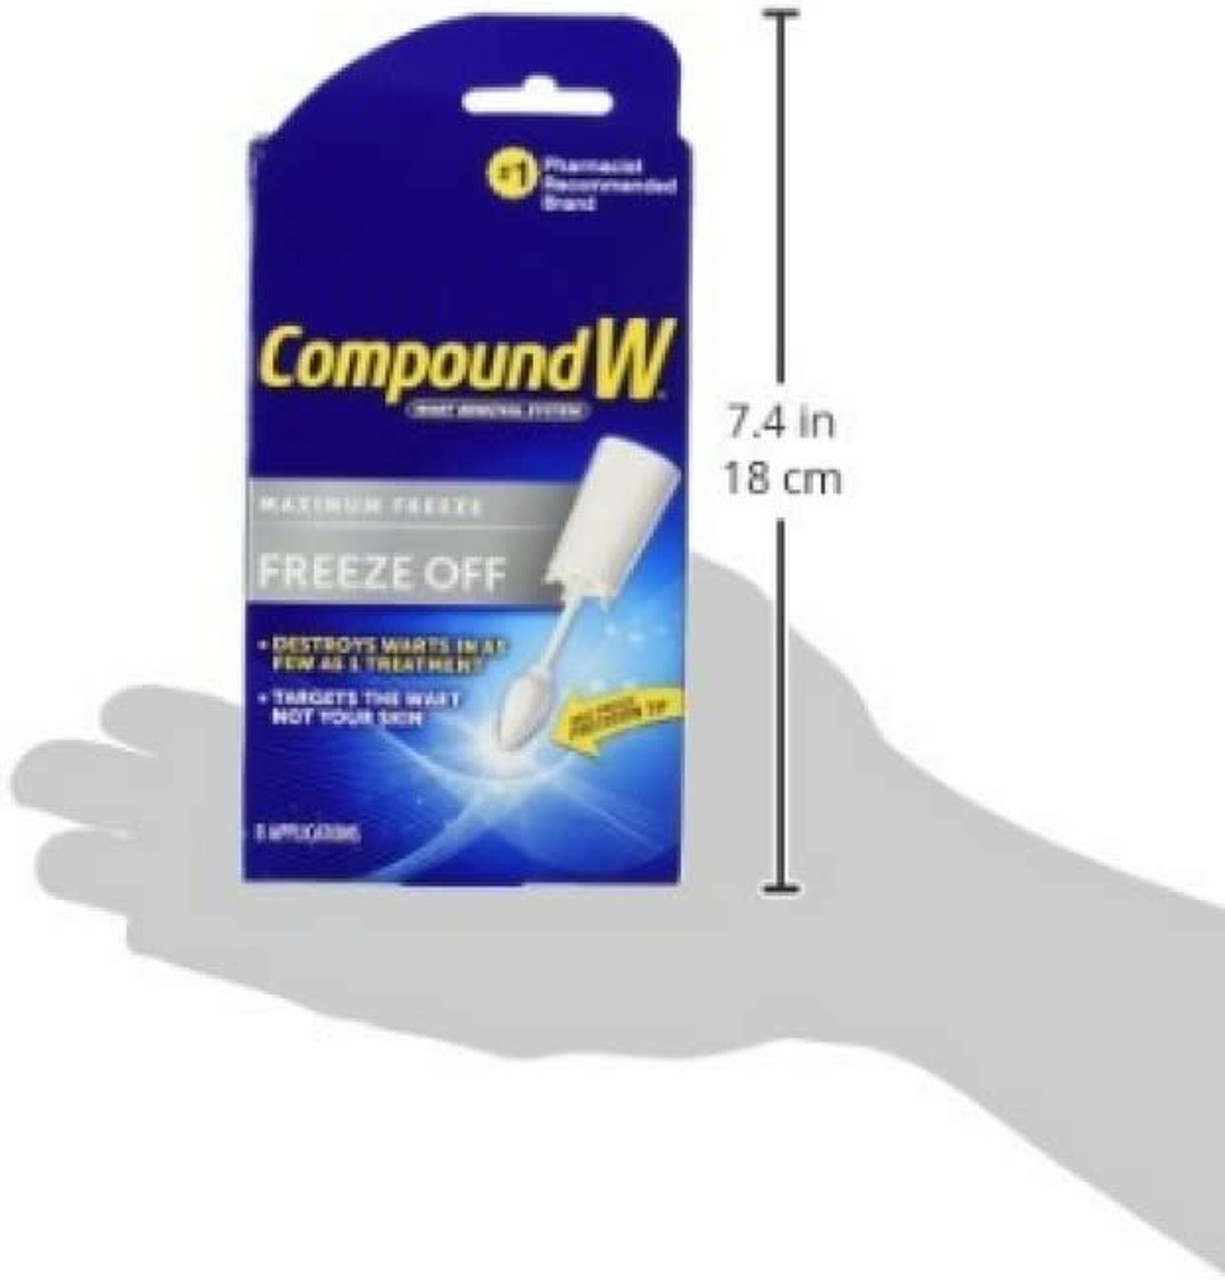  Compound W Dual Power for Large Warts, Freeze Off & Liquid Wart  Remover, 8 Freeze Applications and 12 Comfort Pads : Health & Household